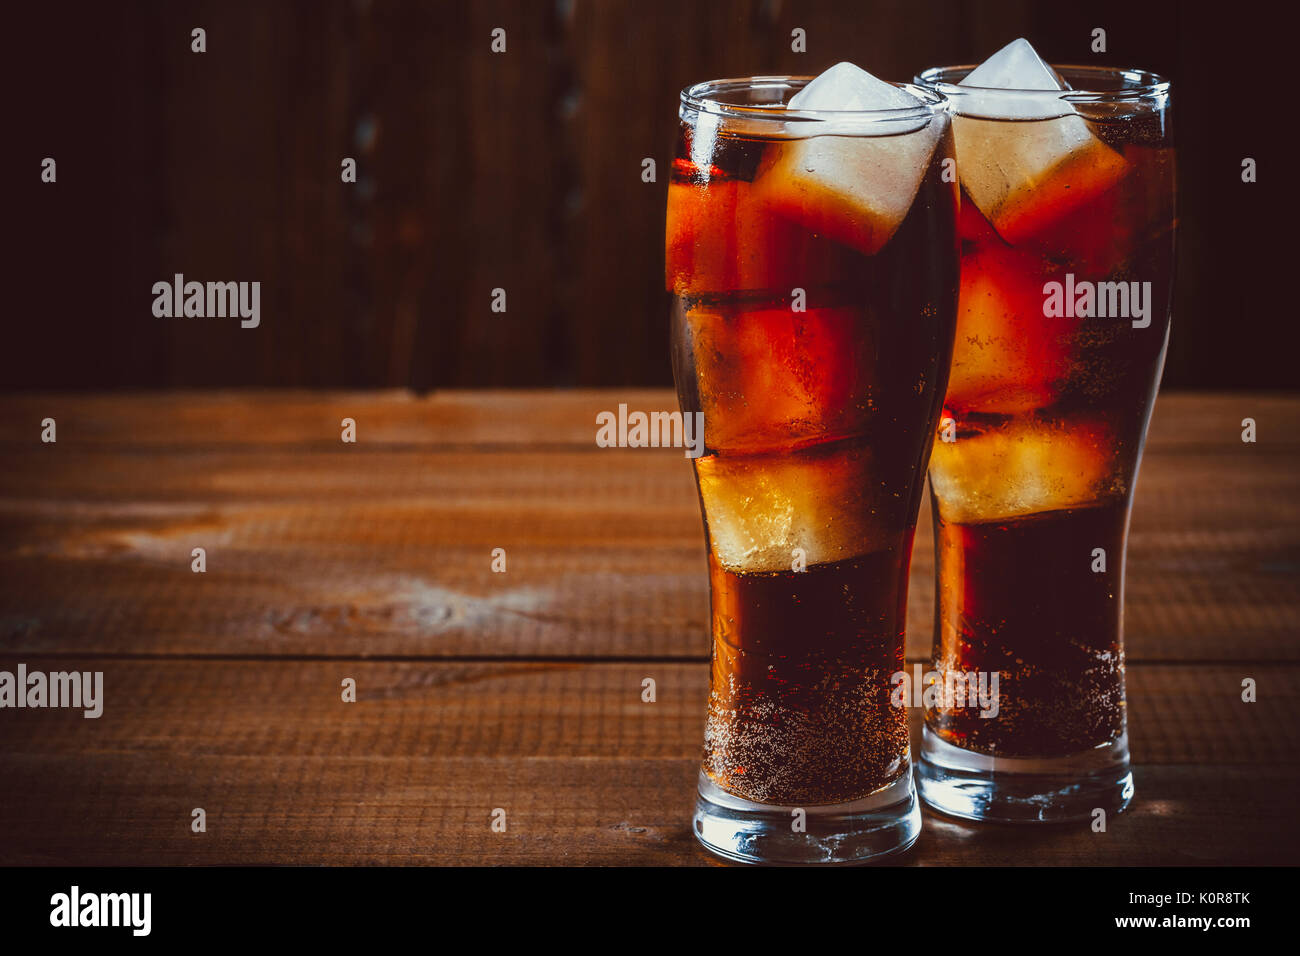 Glass Cup of Cola Soda with Ice Stock Image - Image of brown